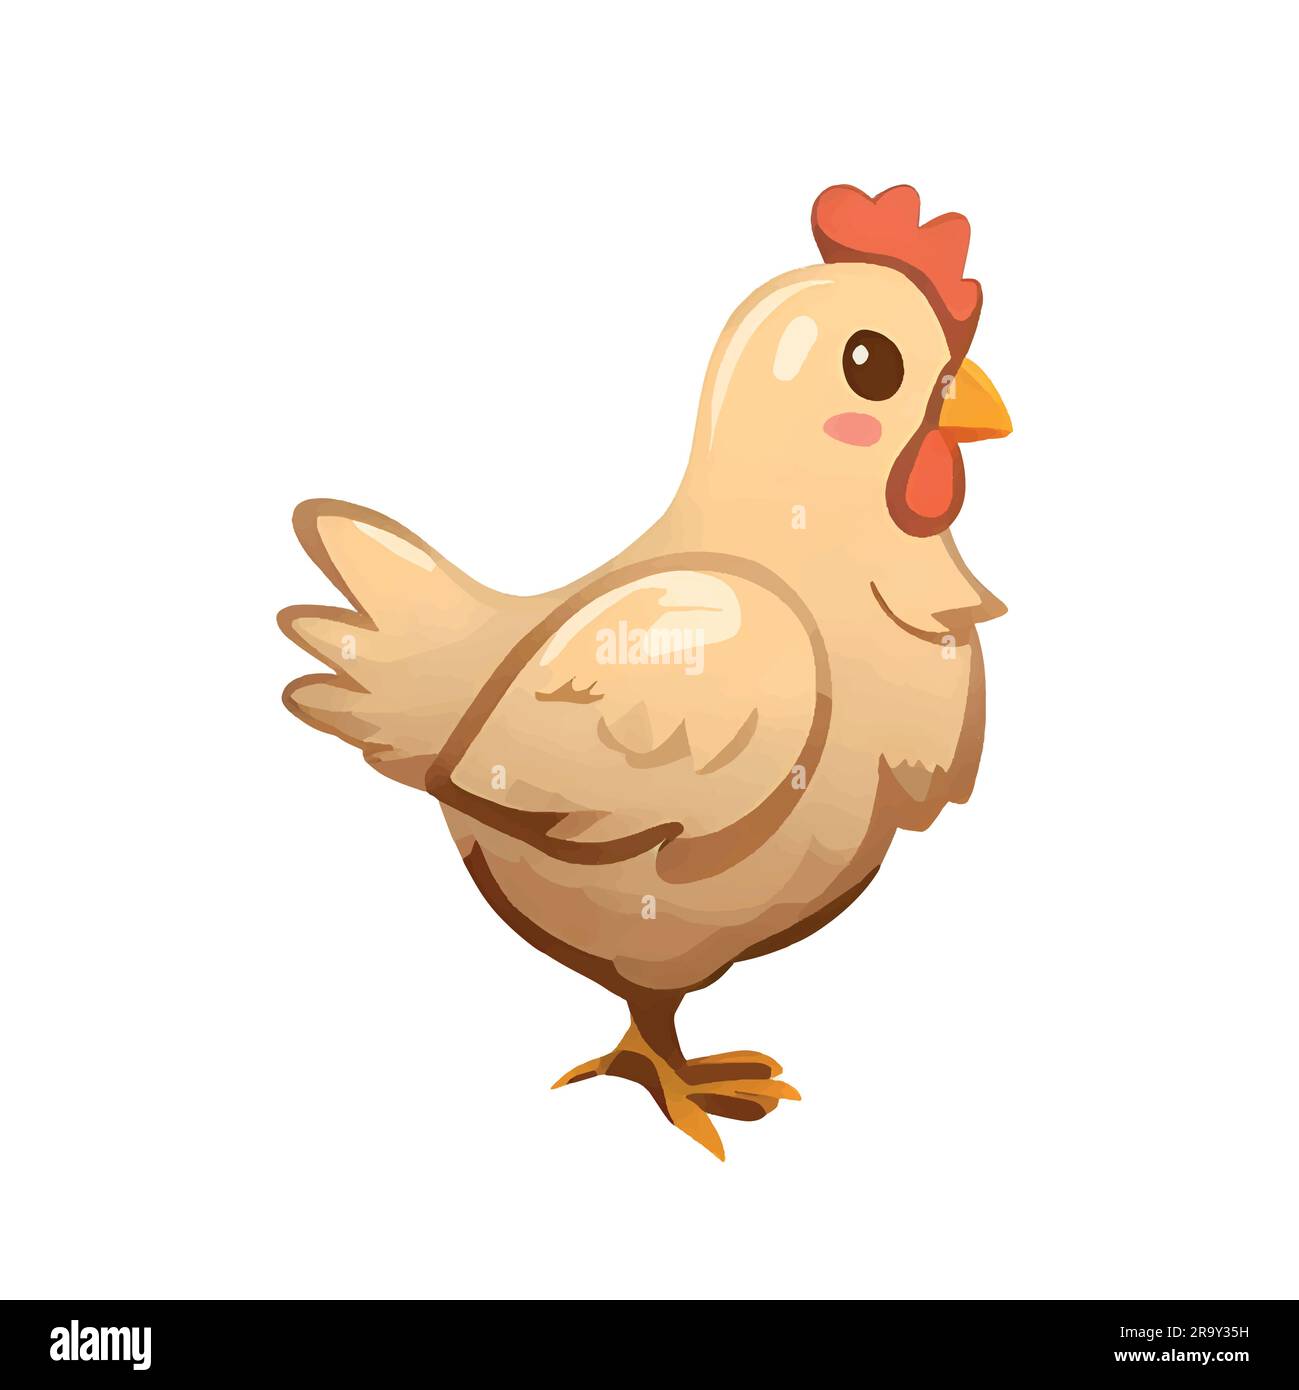 chicken illustration on a white background Stock Vector